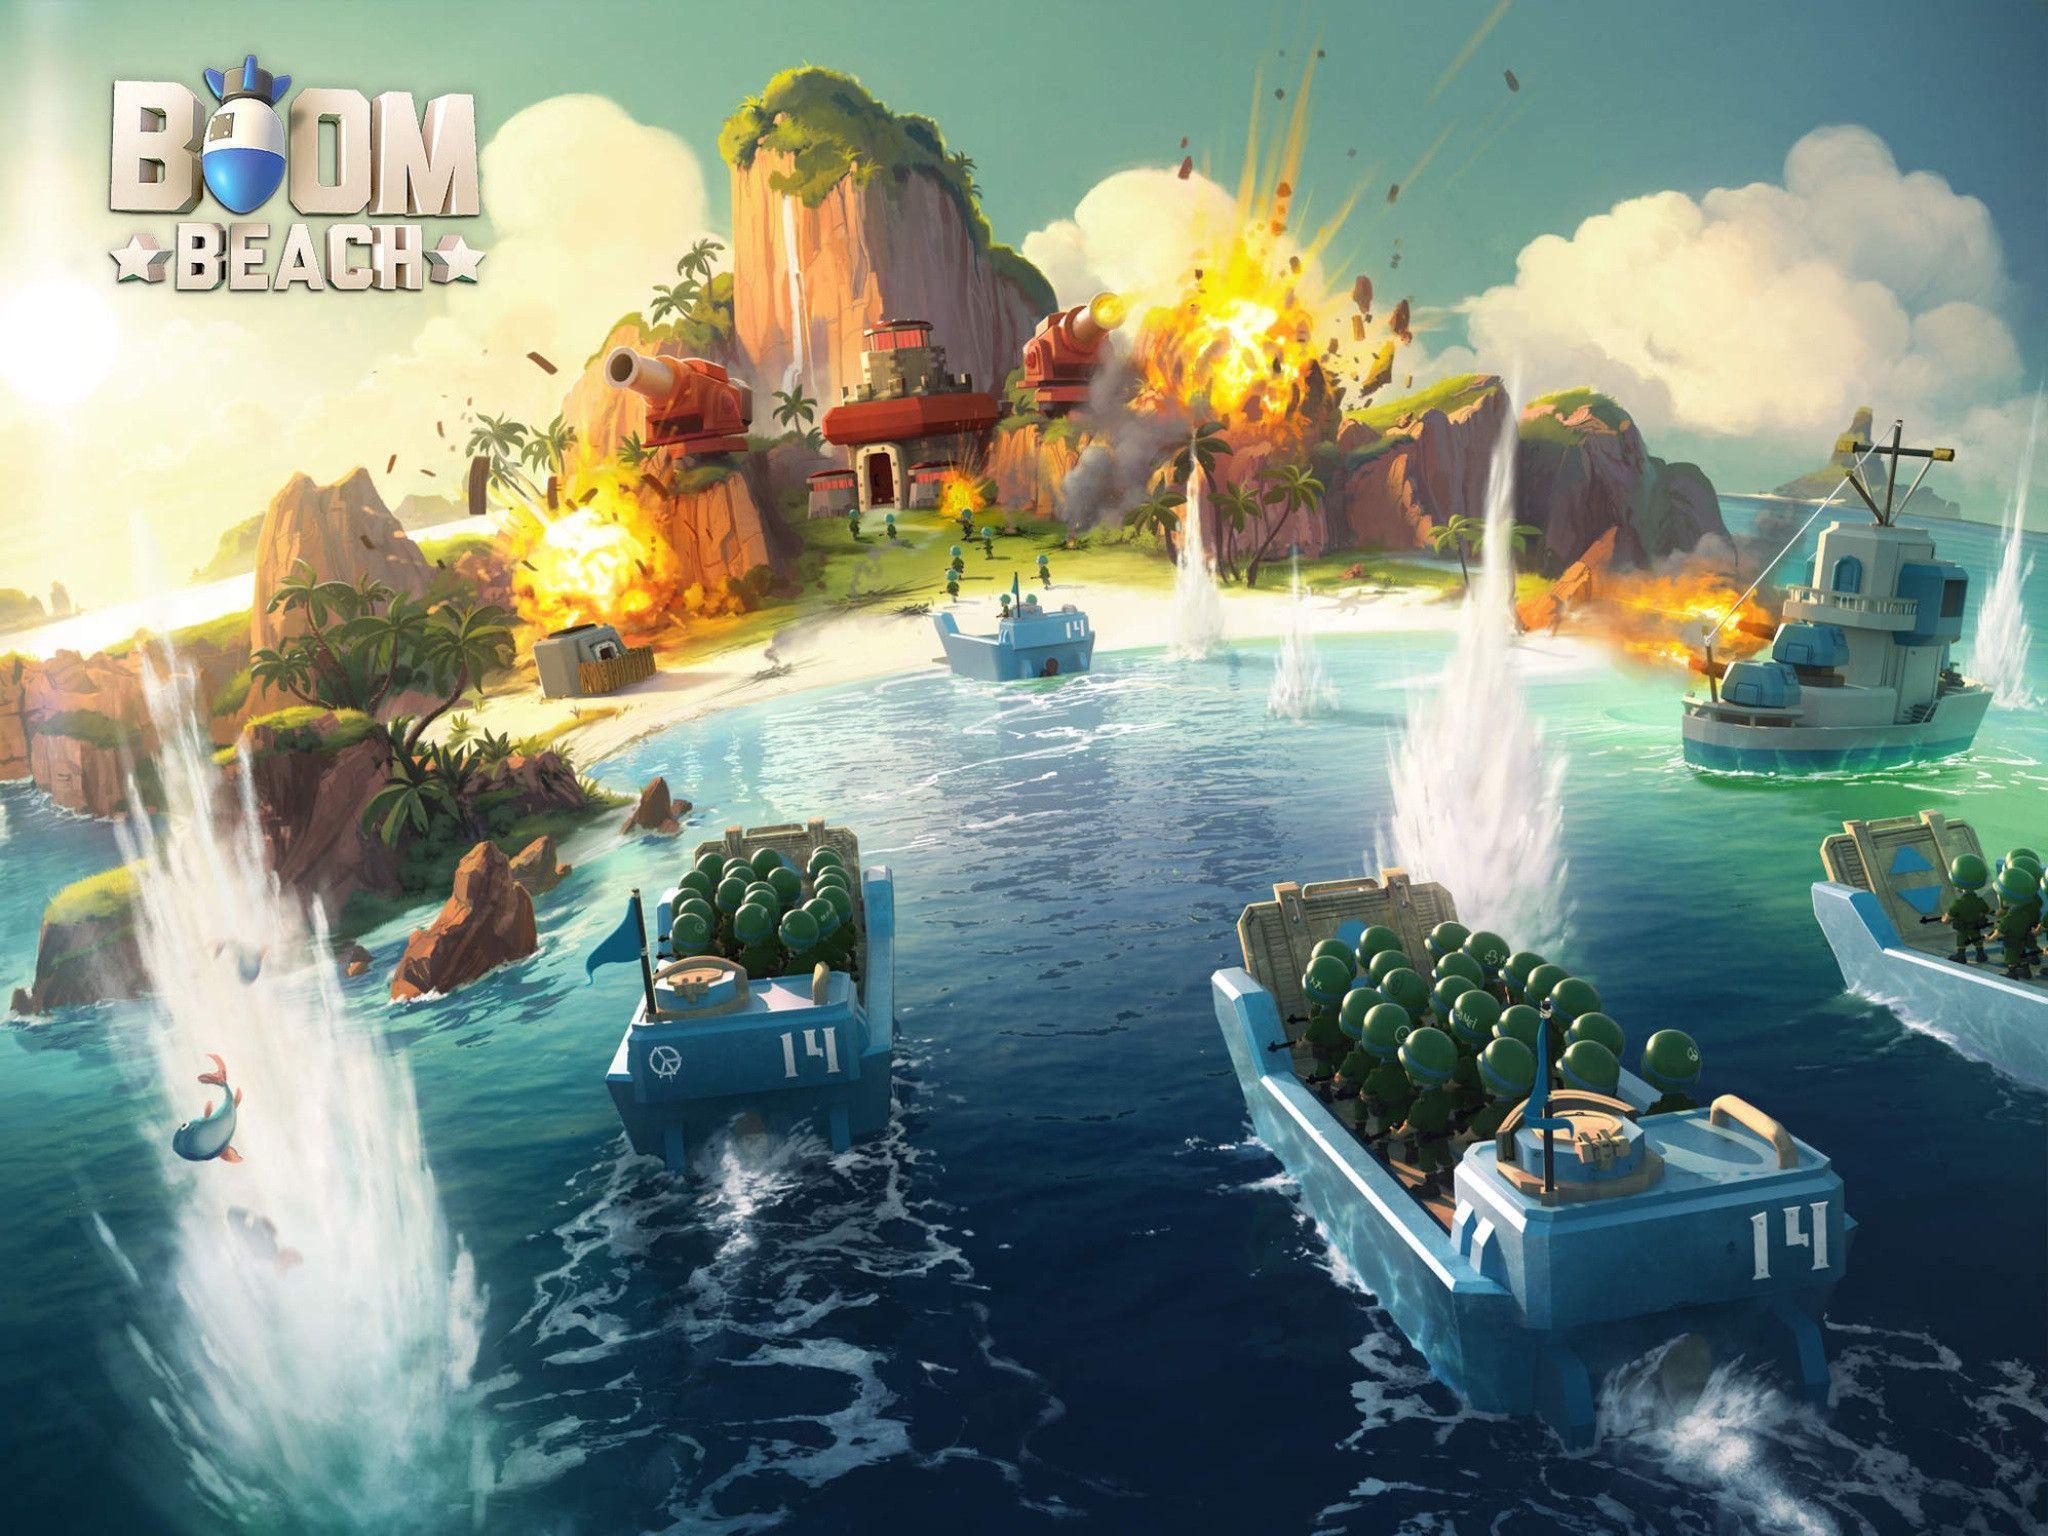 best image about Boom beach. Clash of clans